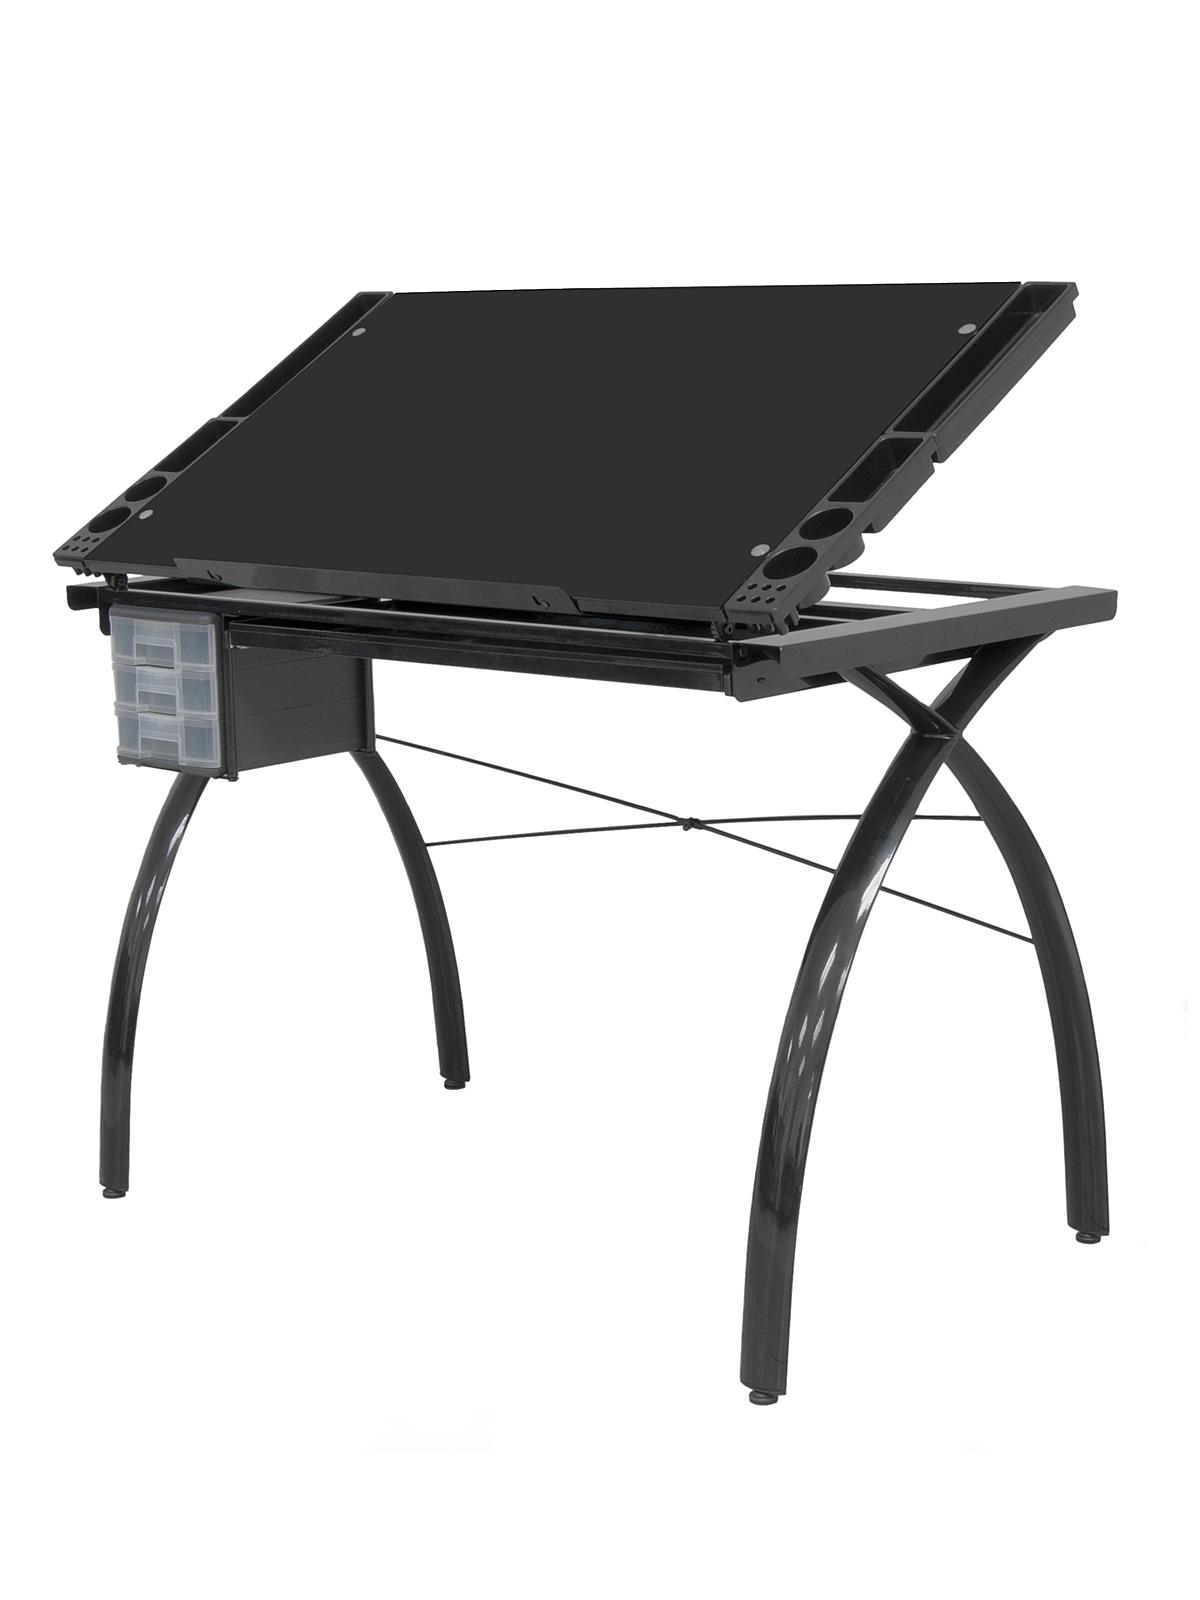 Futura Craft Station Craft Station 43 In. W X 24 In. D X 31 1 2 In. H Black